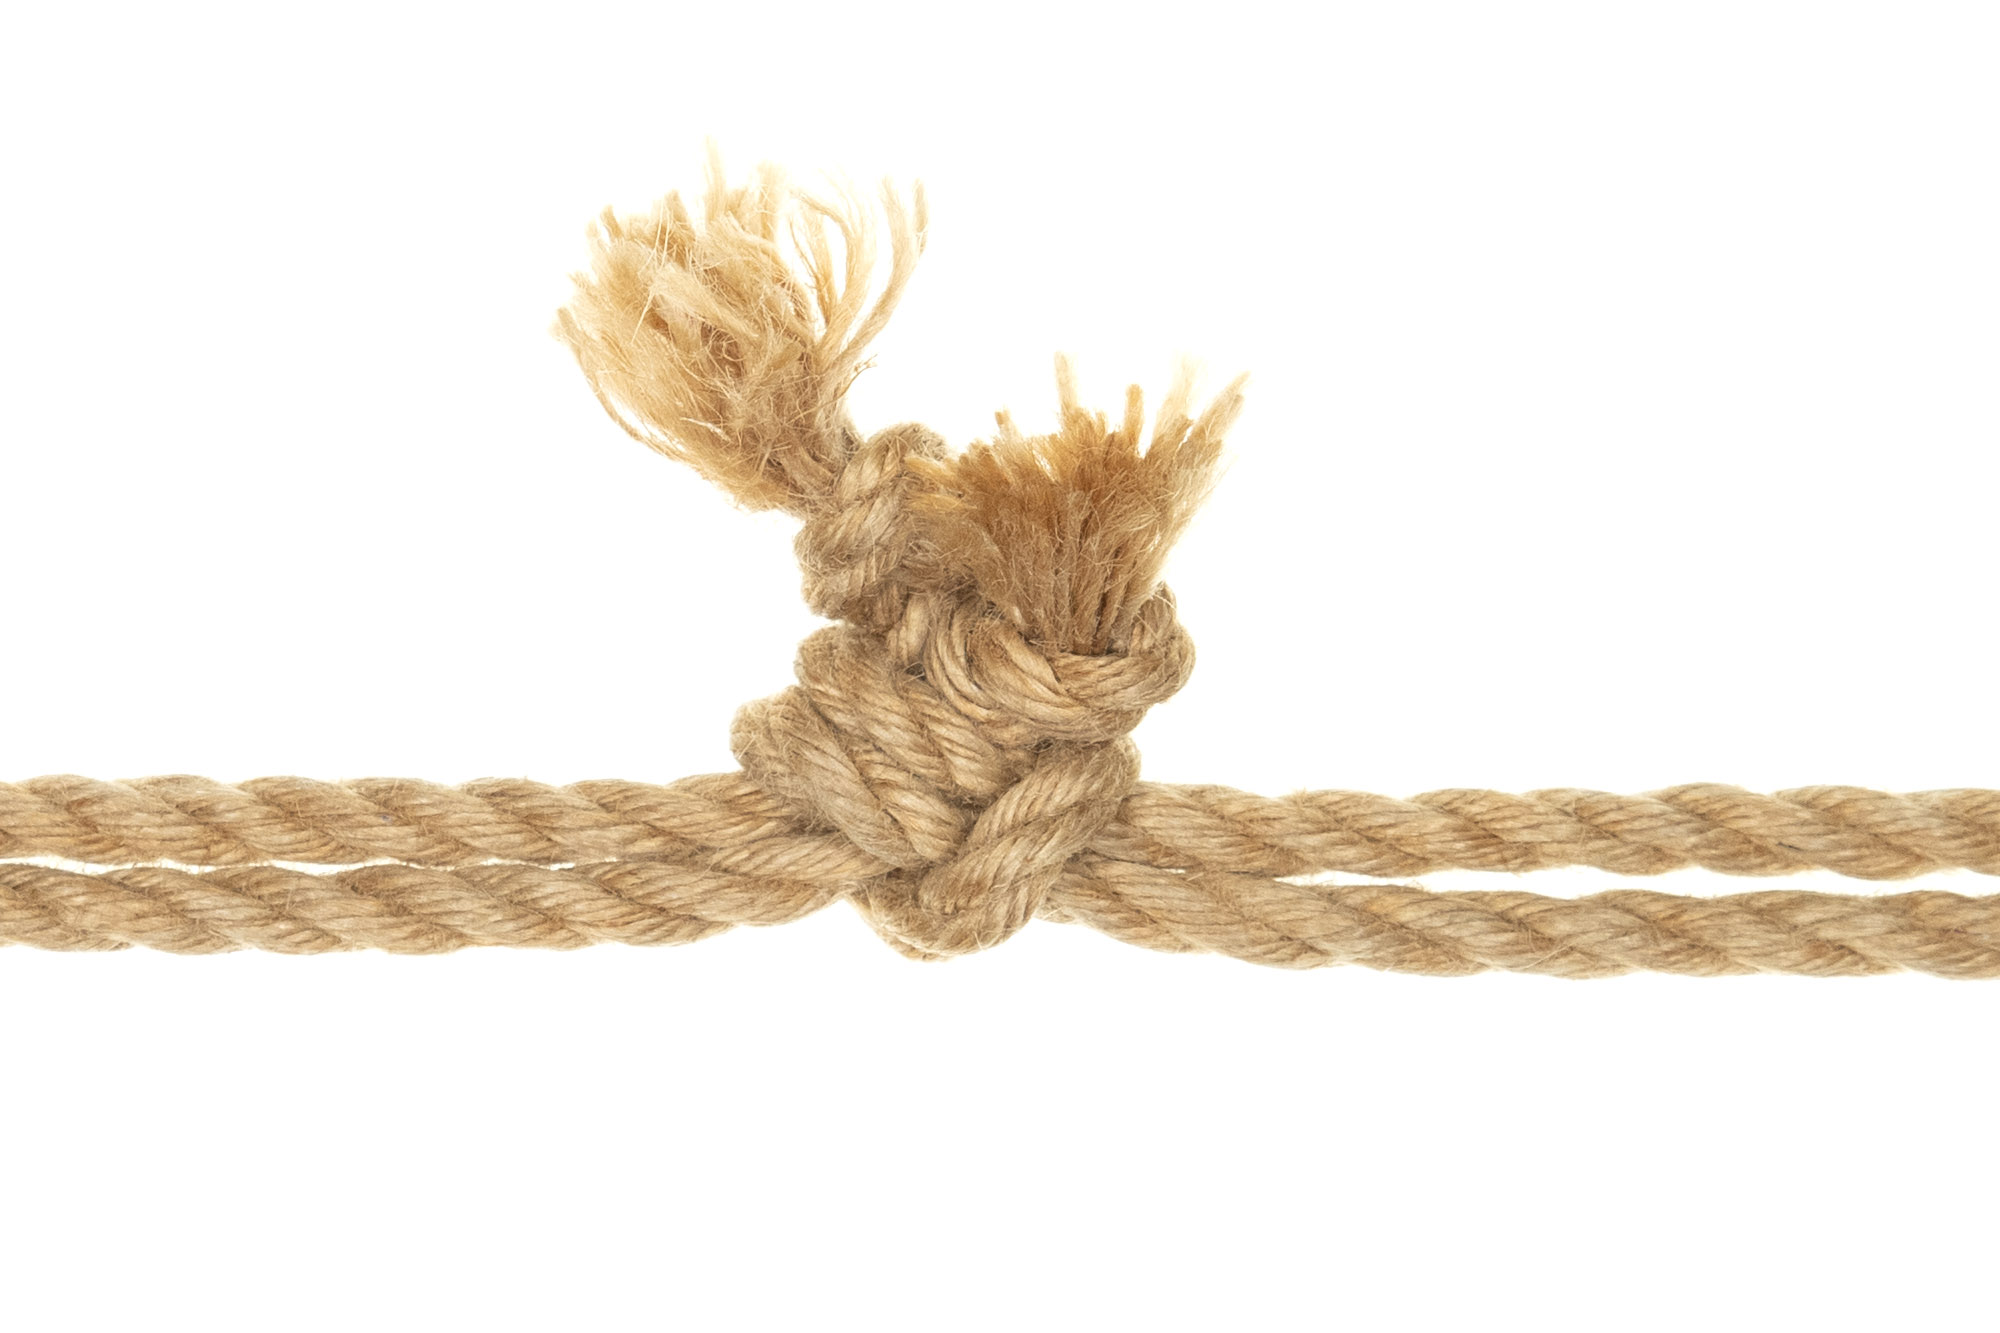 Two lengths of jute rope are joined by a lark’s head extension. The knotted ends of the rope on the left are held securely by a compacted lark’s head formed by the bight of the rope on the right.